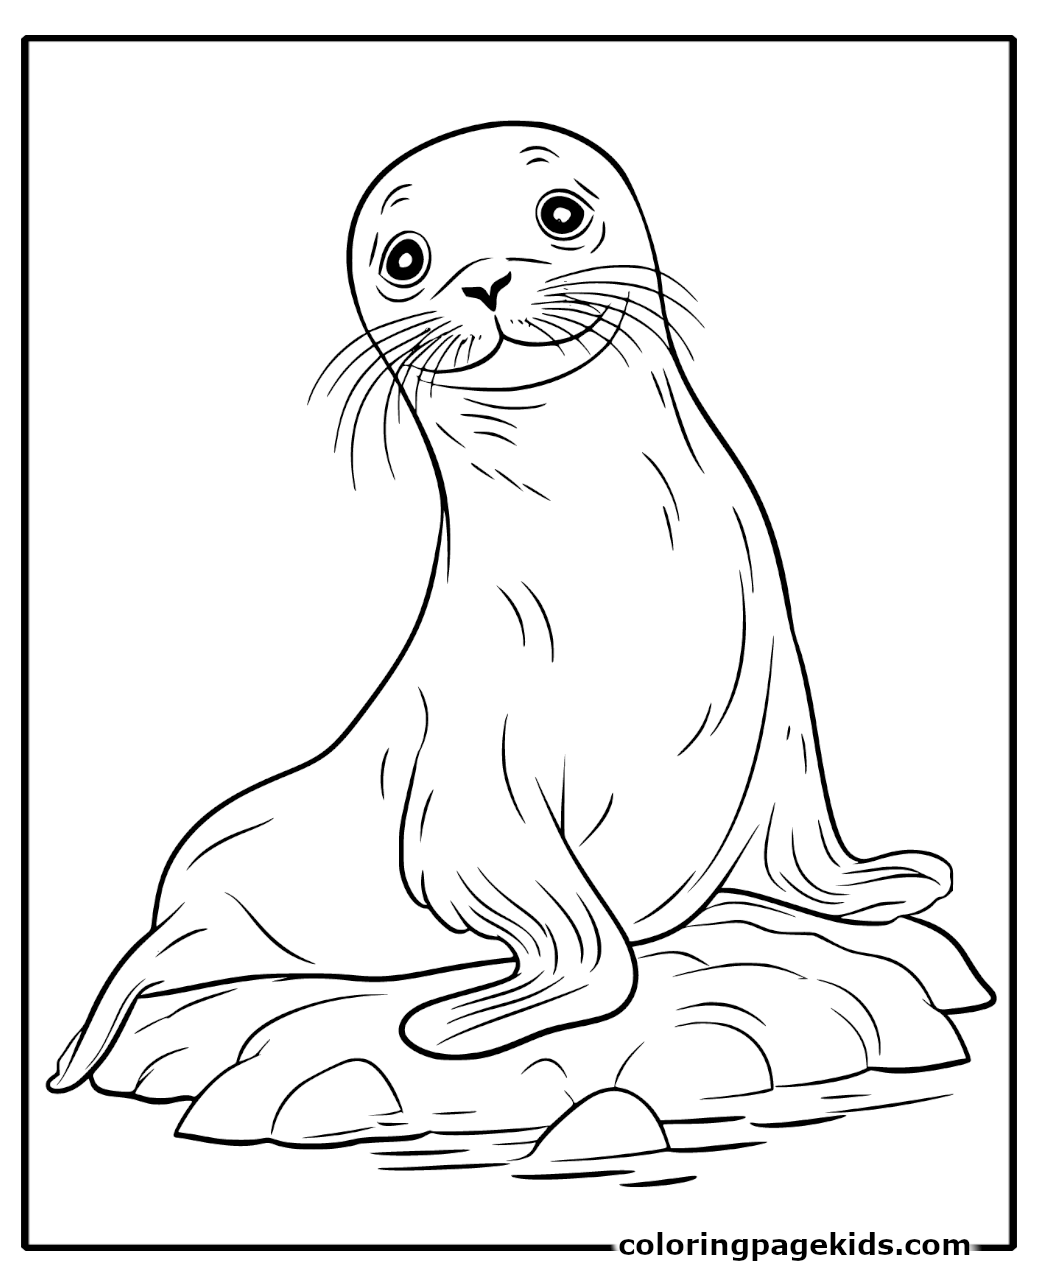 Free Printable Seal Coloring Pages For Kids - coloringpagekids.com